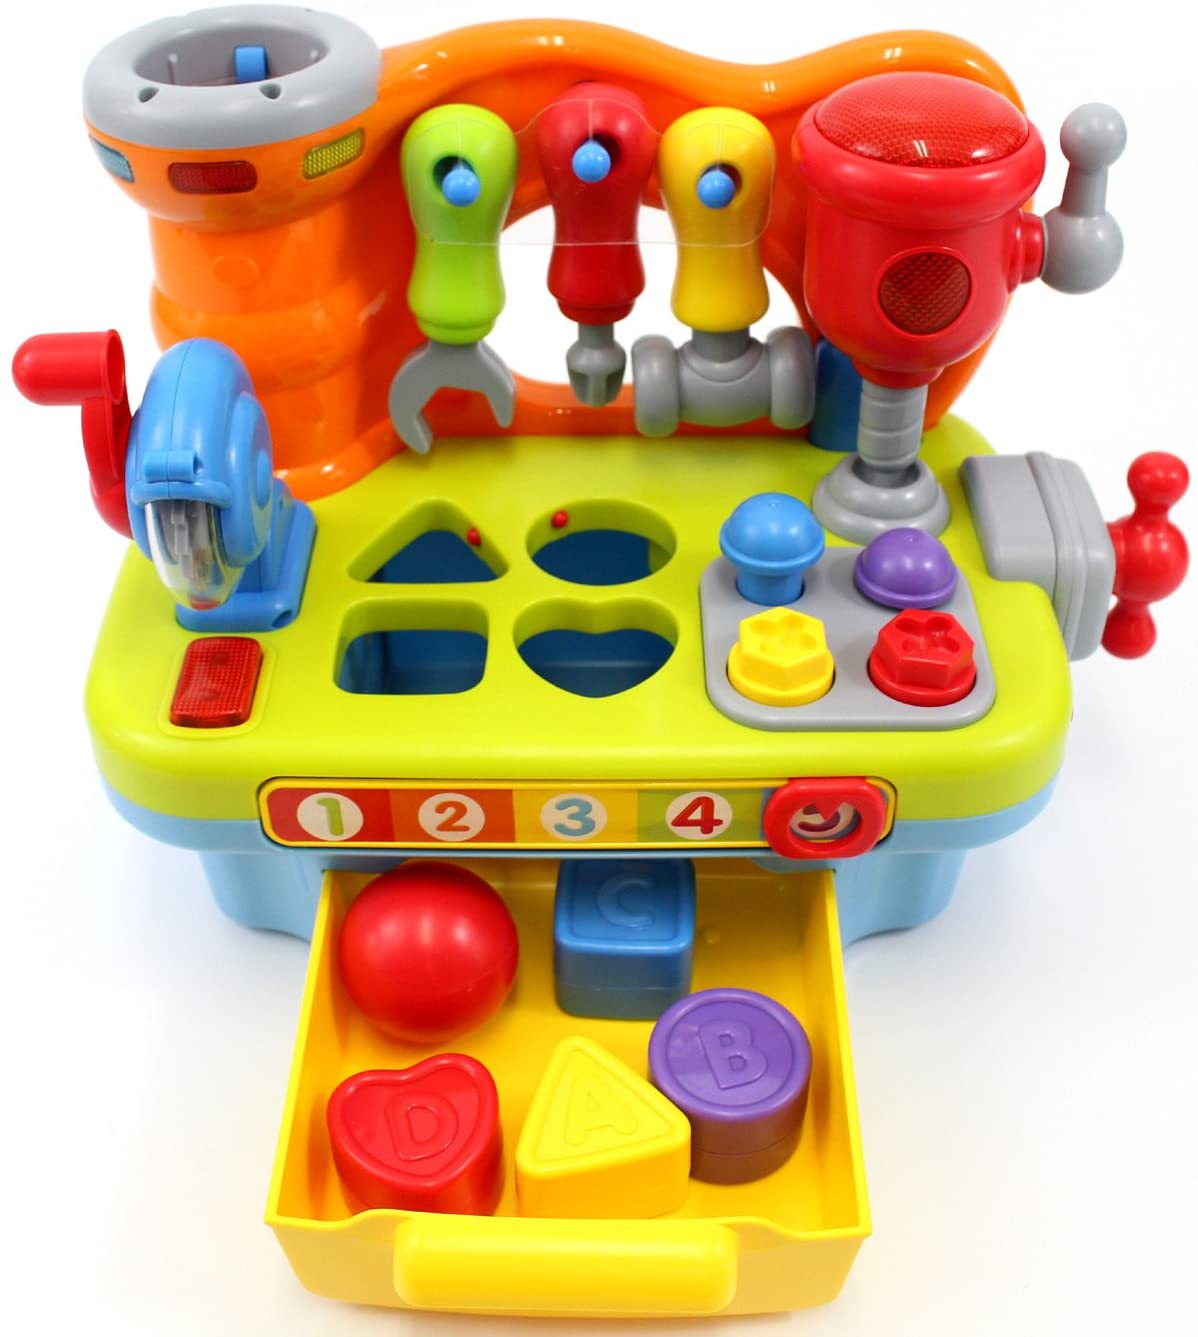 CifToys Electronic Musical Workbench Infant Boy Toy